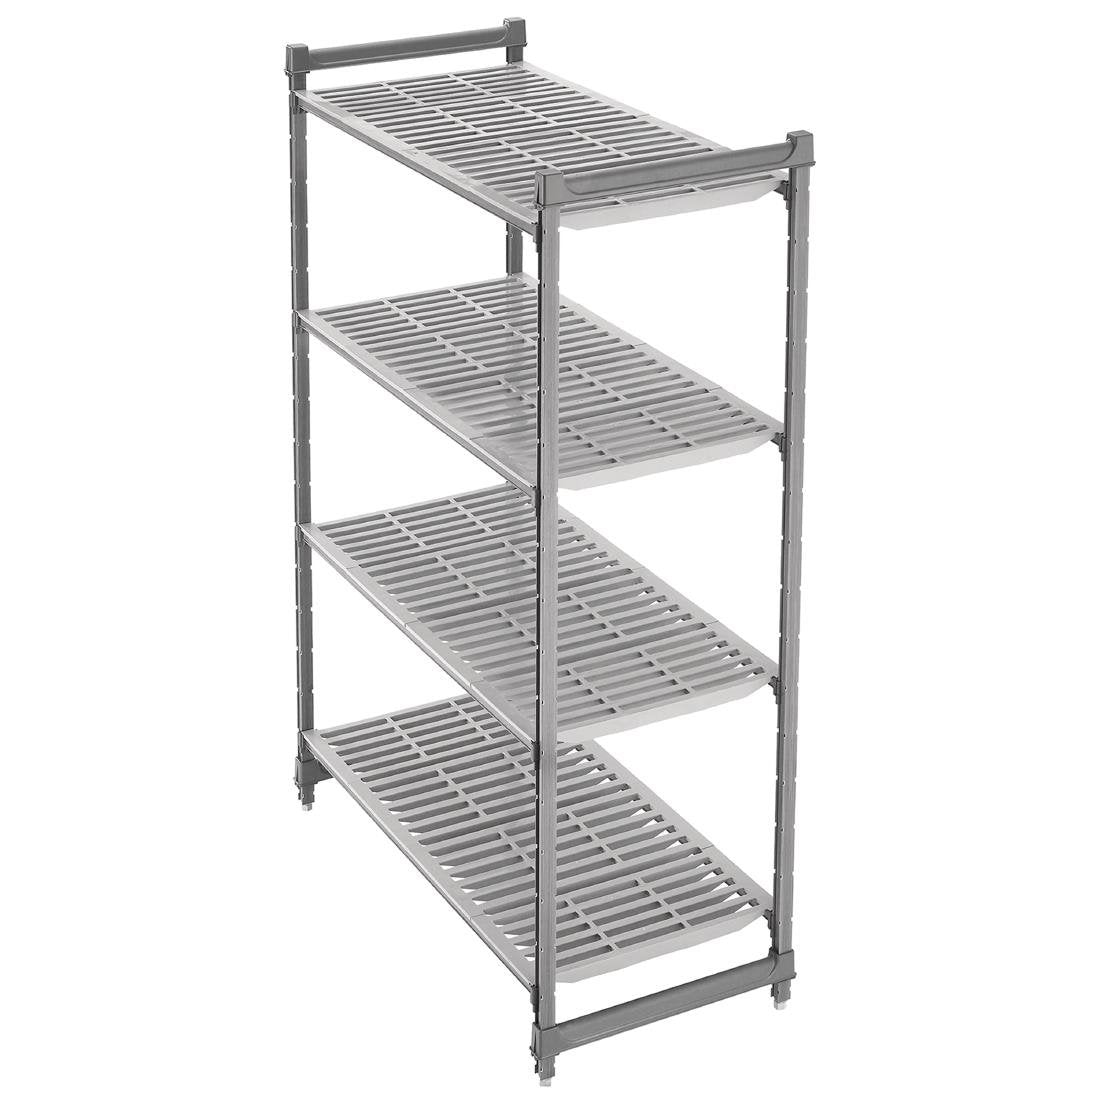 DM771 Cambro Stationary Vented 4 Shelf Starter Units 1830 x 1375 x 460mm JD Catering Equipment Solutions Ltd